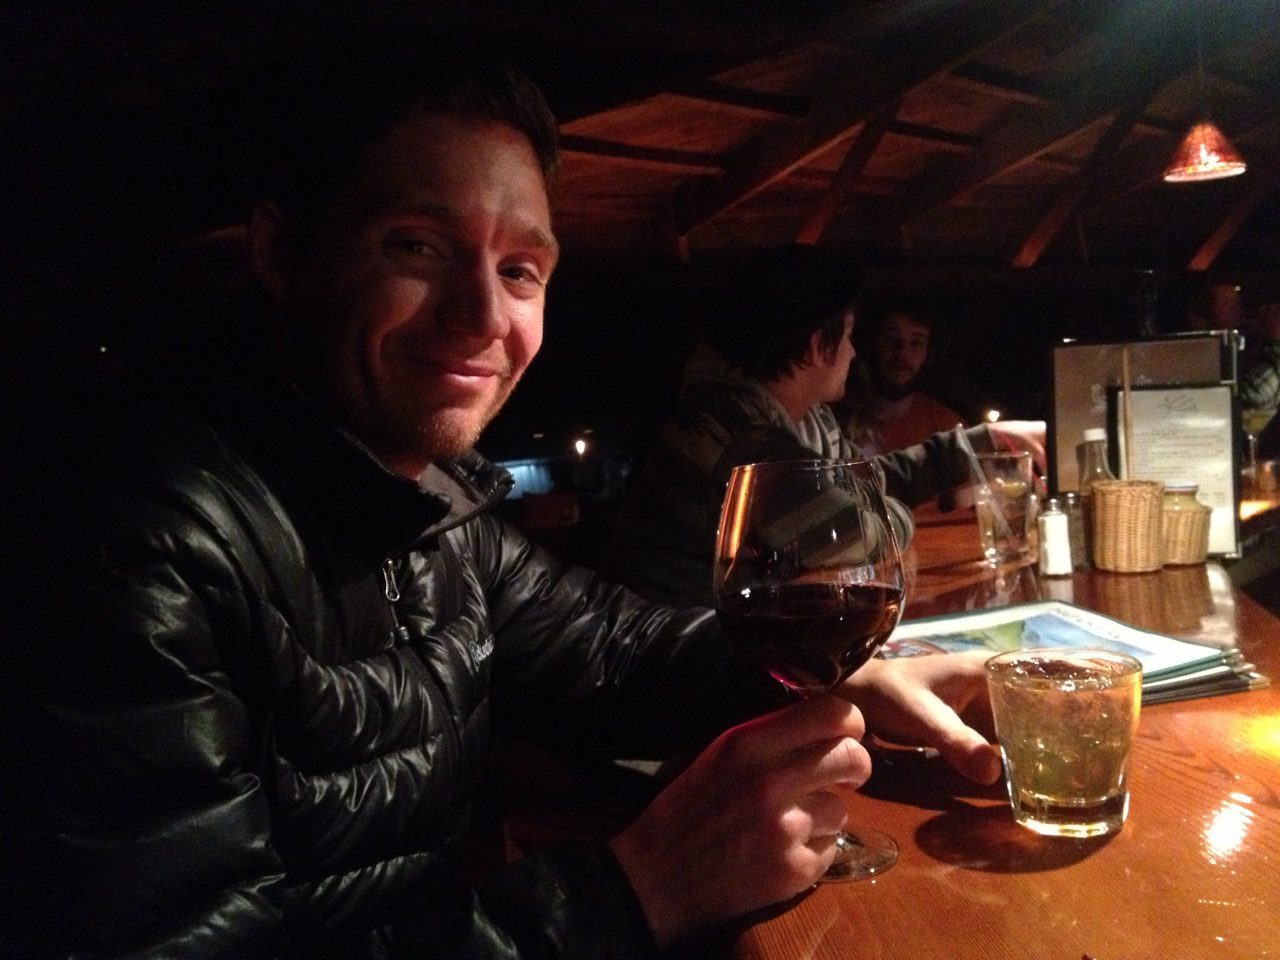 Pretending I like alcohol at Nepenthe, a gorgeous redwood restaurant overlooking the Big Sur coast. I wound up sipping my (super strong) Manhattan a couple times and then giving it away to a young guy who regaled us with stories of backpacking the Appalachian Trail in -5 degree weather. He deserved it more than I did.